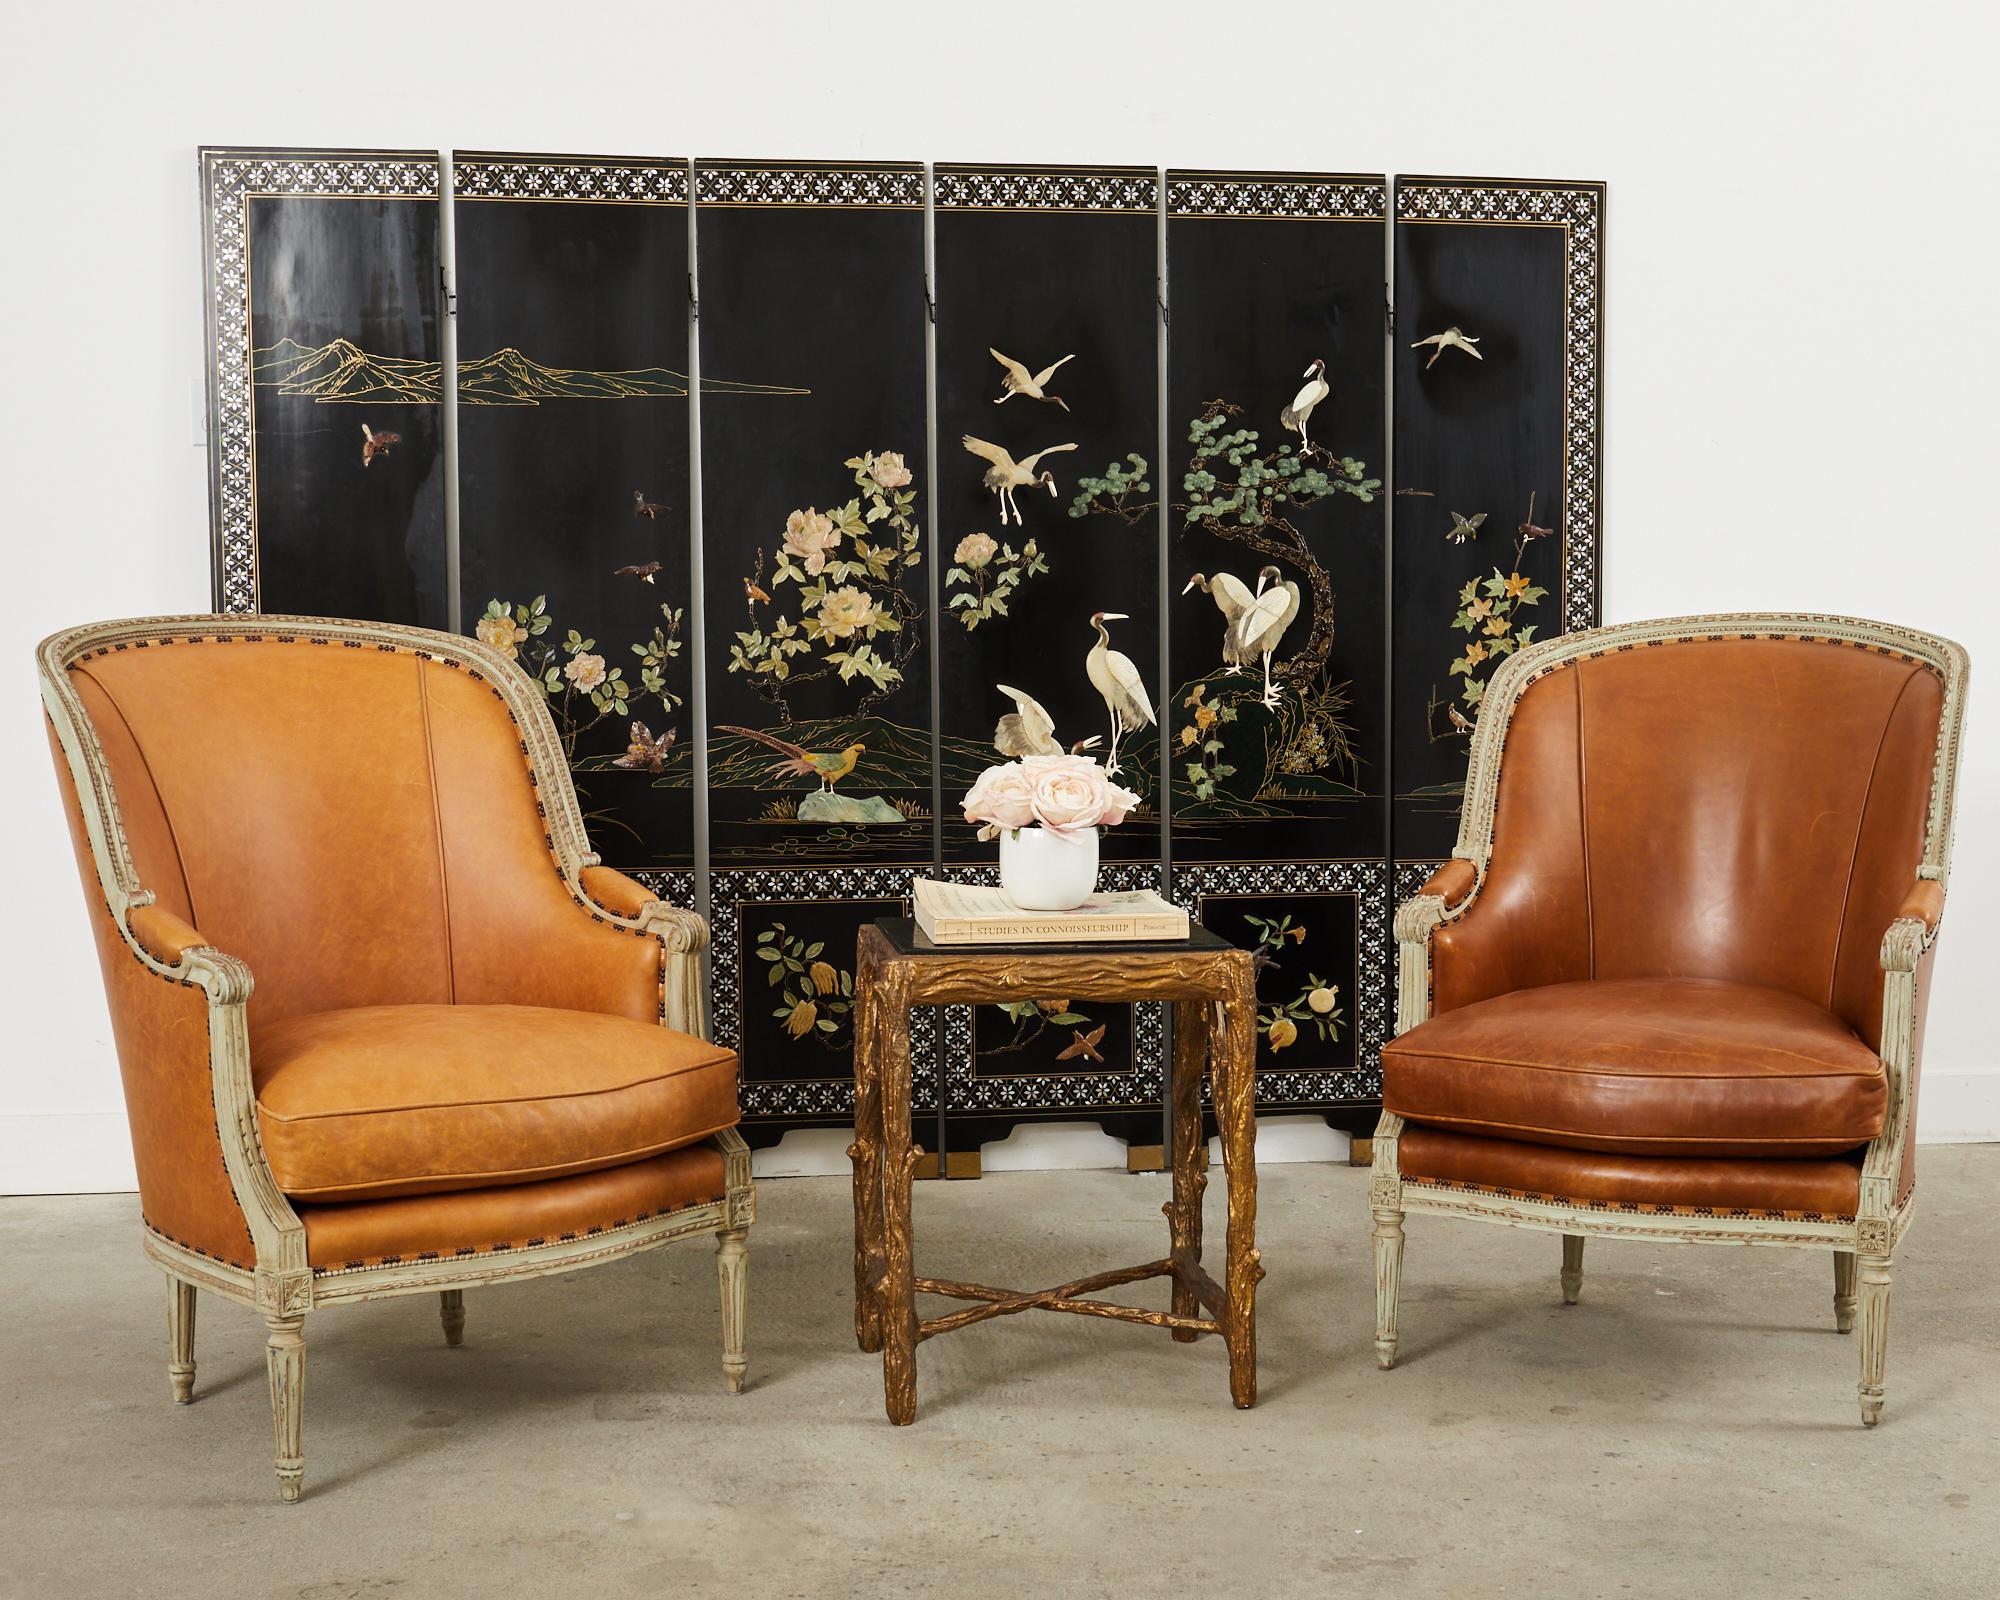 Impressive Chinese export six-panel coromandel lacquered folding screen featuring a carved soapstone floral landscape with cranes. Each panel is 16 inches wide and embellished with an inlaid Mother of Pearl border having a floral motif and geometric